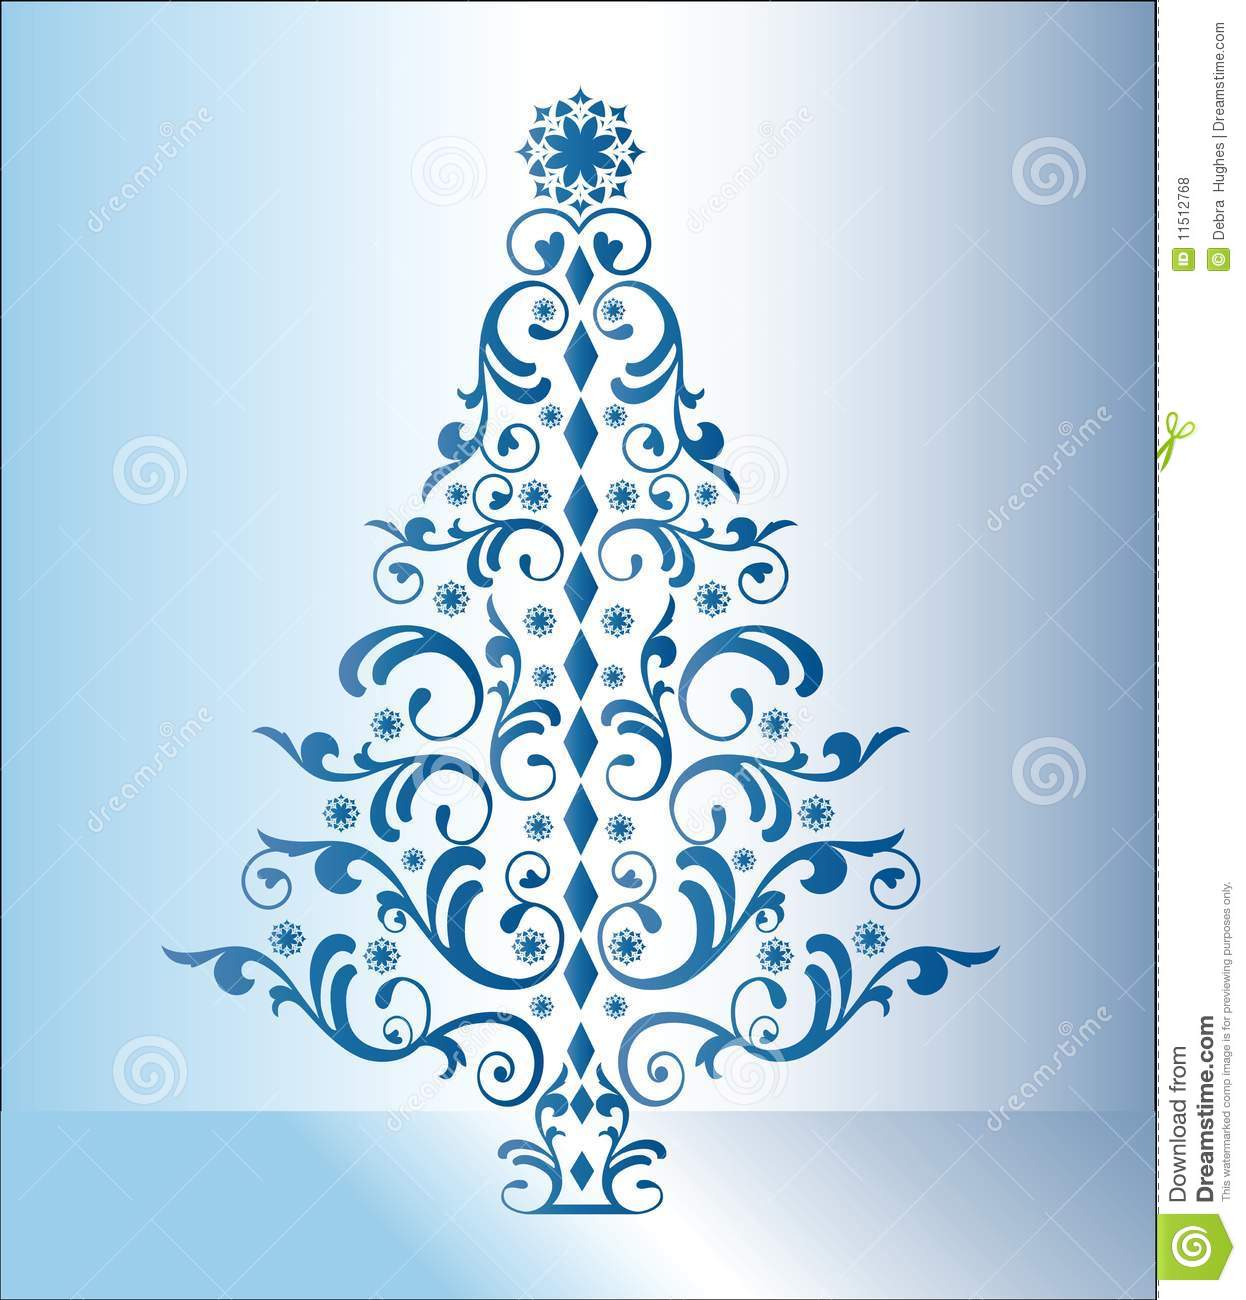 Stylized Blue Christmas Tree With Snowflakes Separate Elements For    